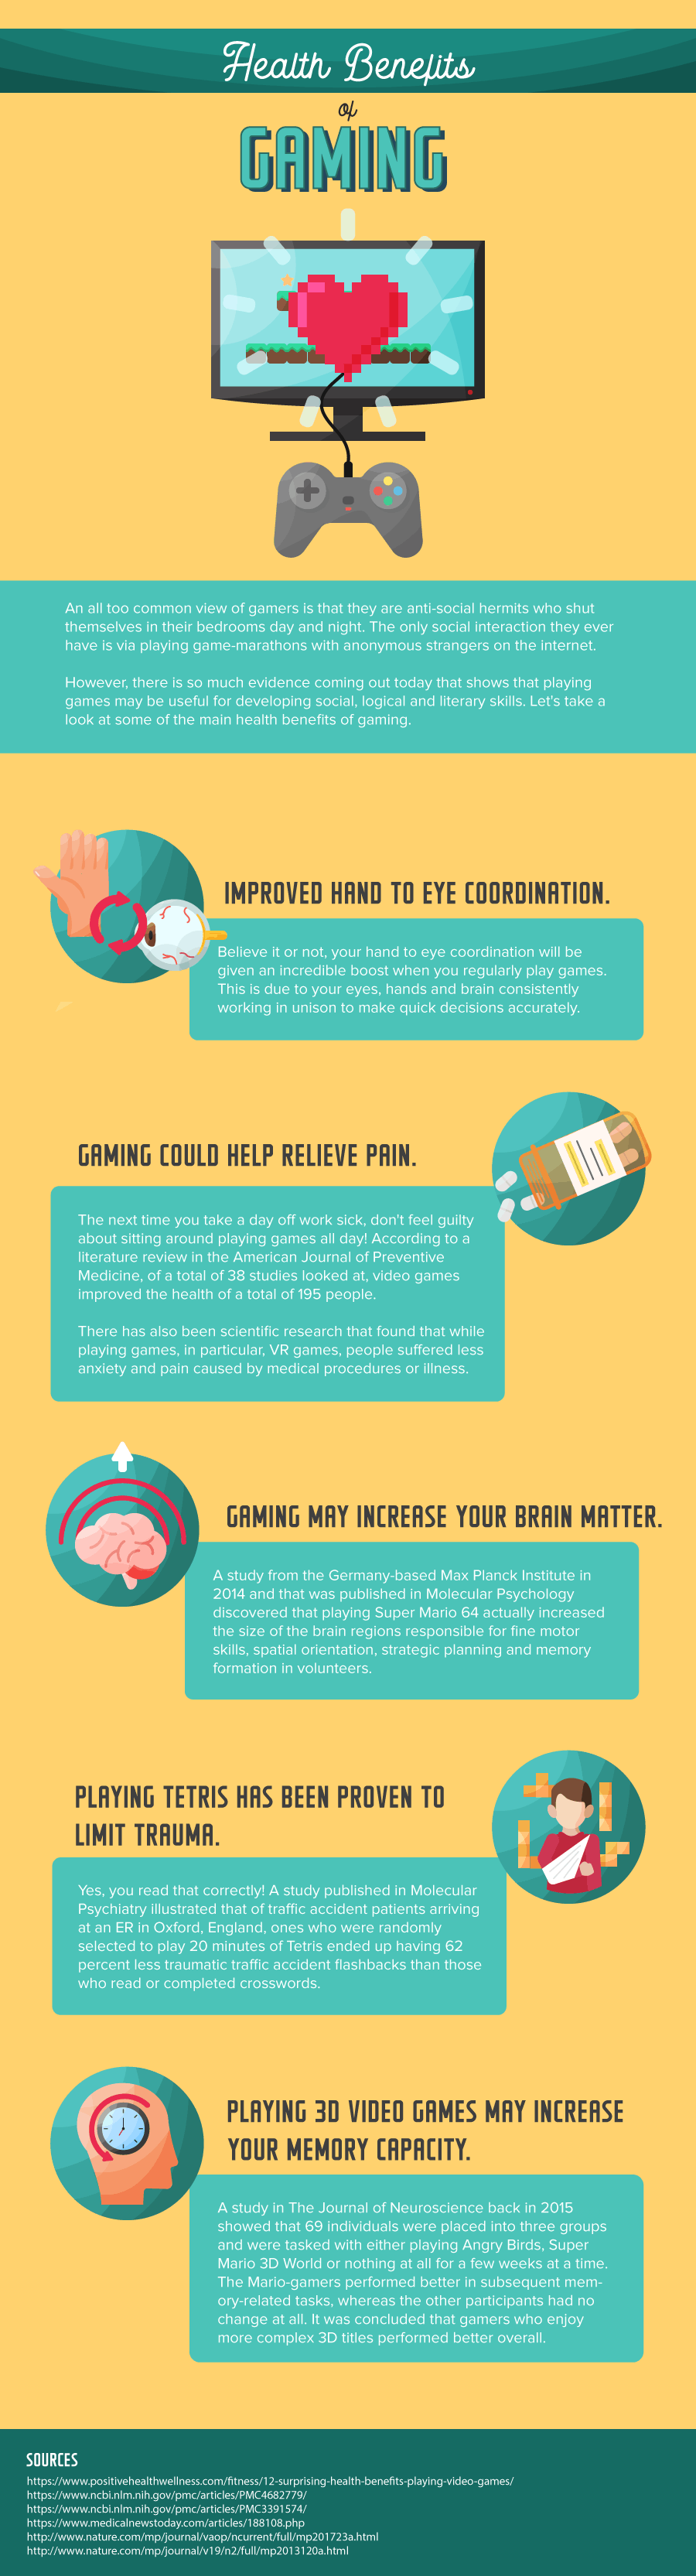 Health Benefits of Gaming